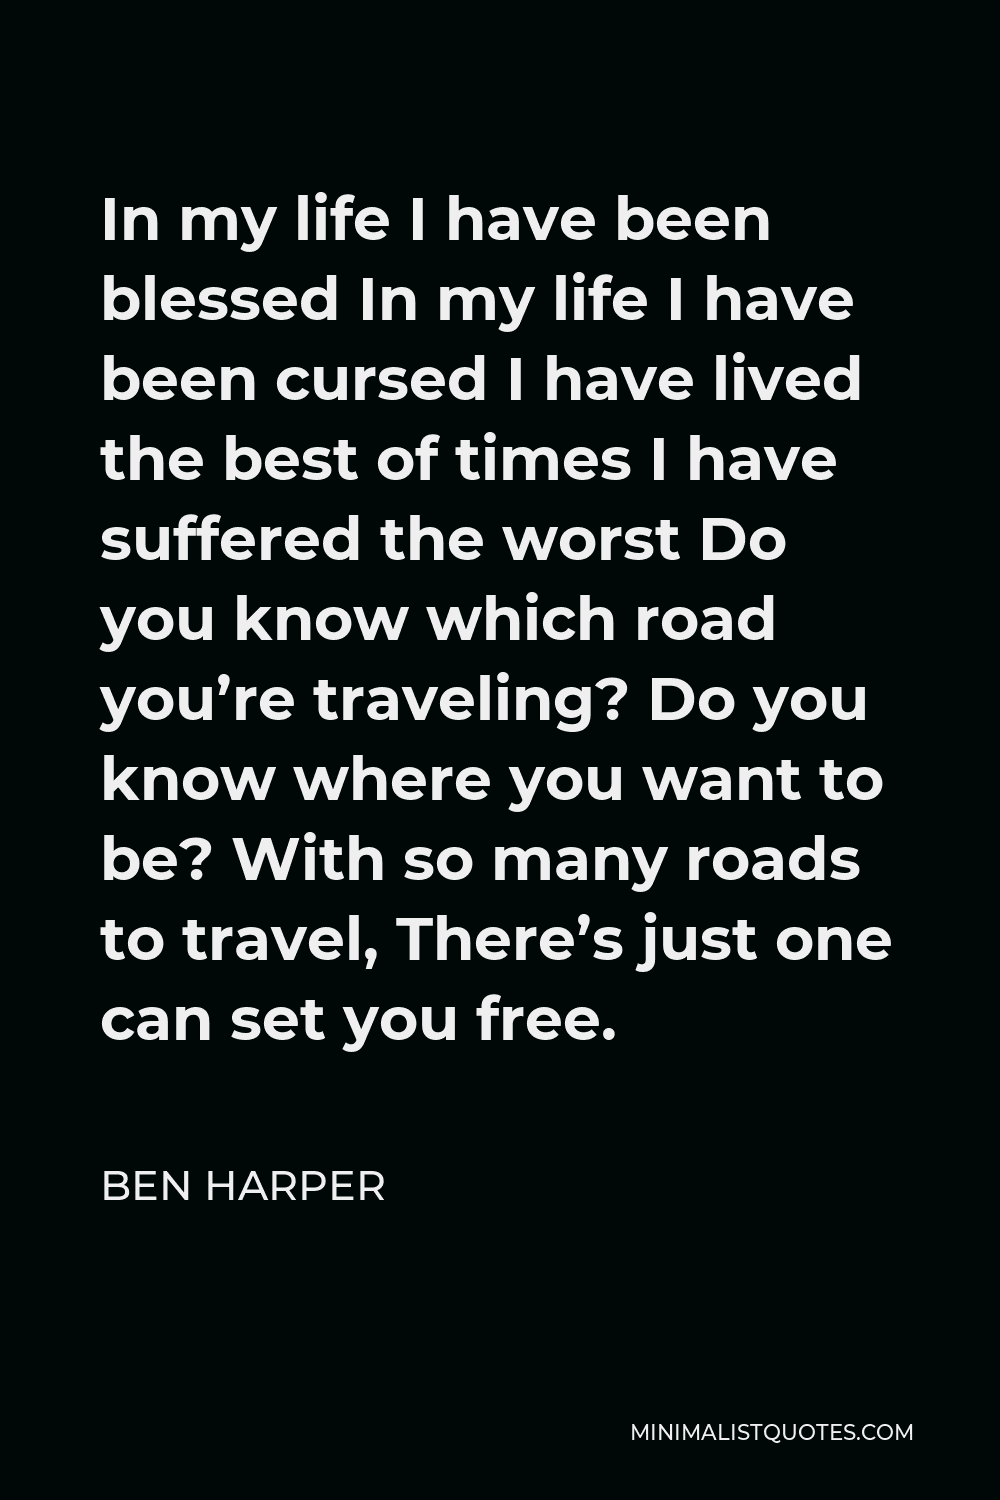 Ben Harper Quote - In my life I have been blessed In my life I have been cursed I have lived the best of times I have suffered the worst Do you know which road you’re traveling? Do you know where you want to be? With so many roads to travel, There’s just one can set you free.